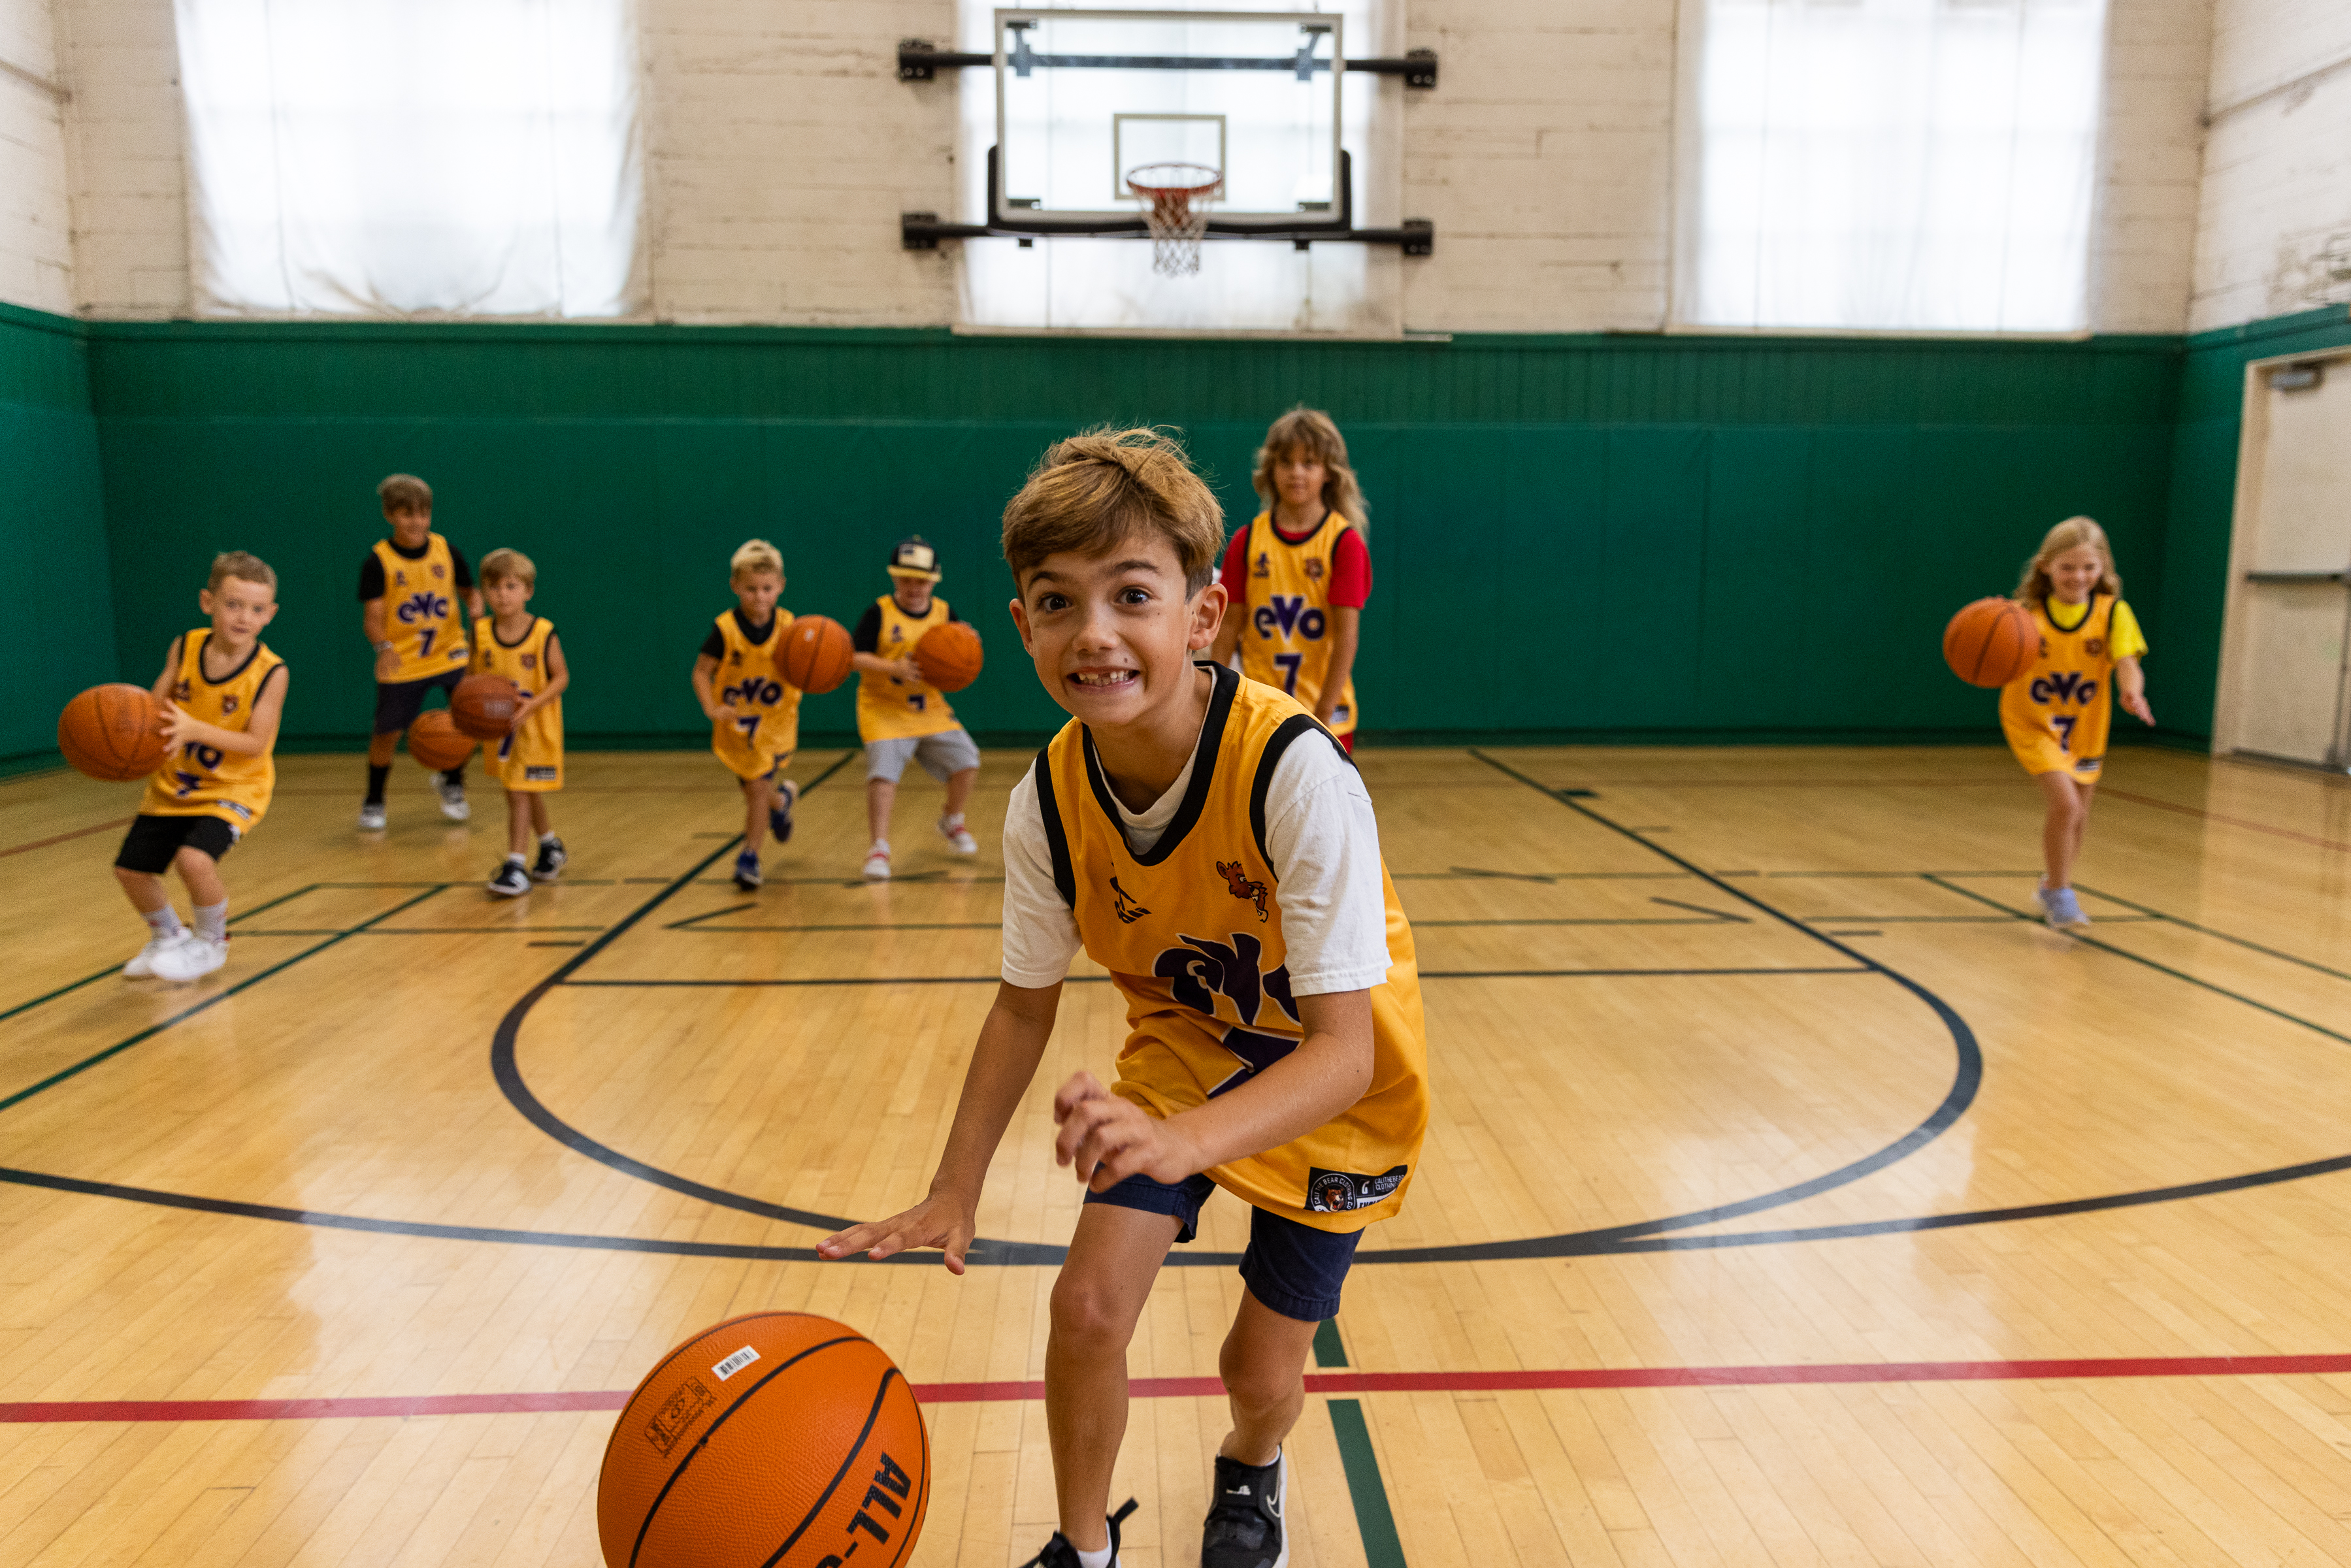 Camper dribbles a basketball toward the camera with a large group in the background dribbling as well.